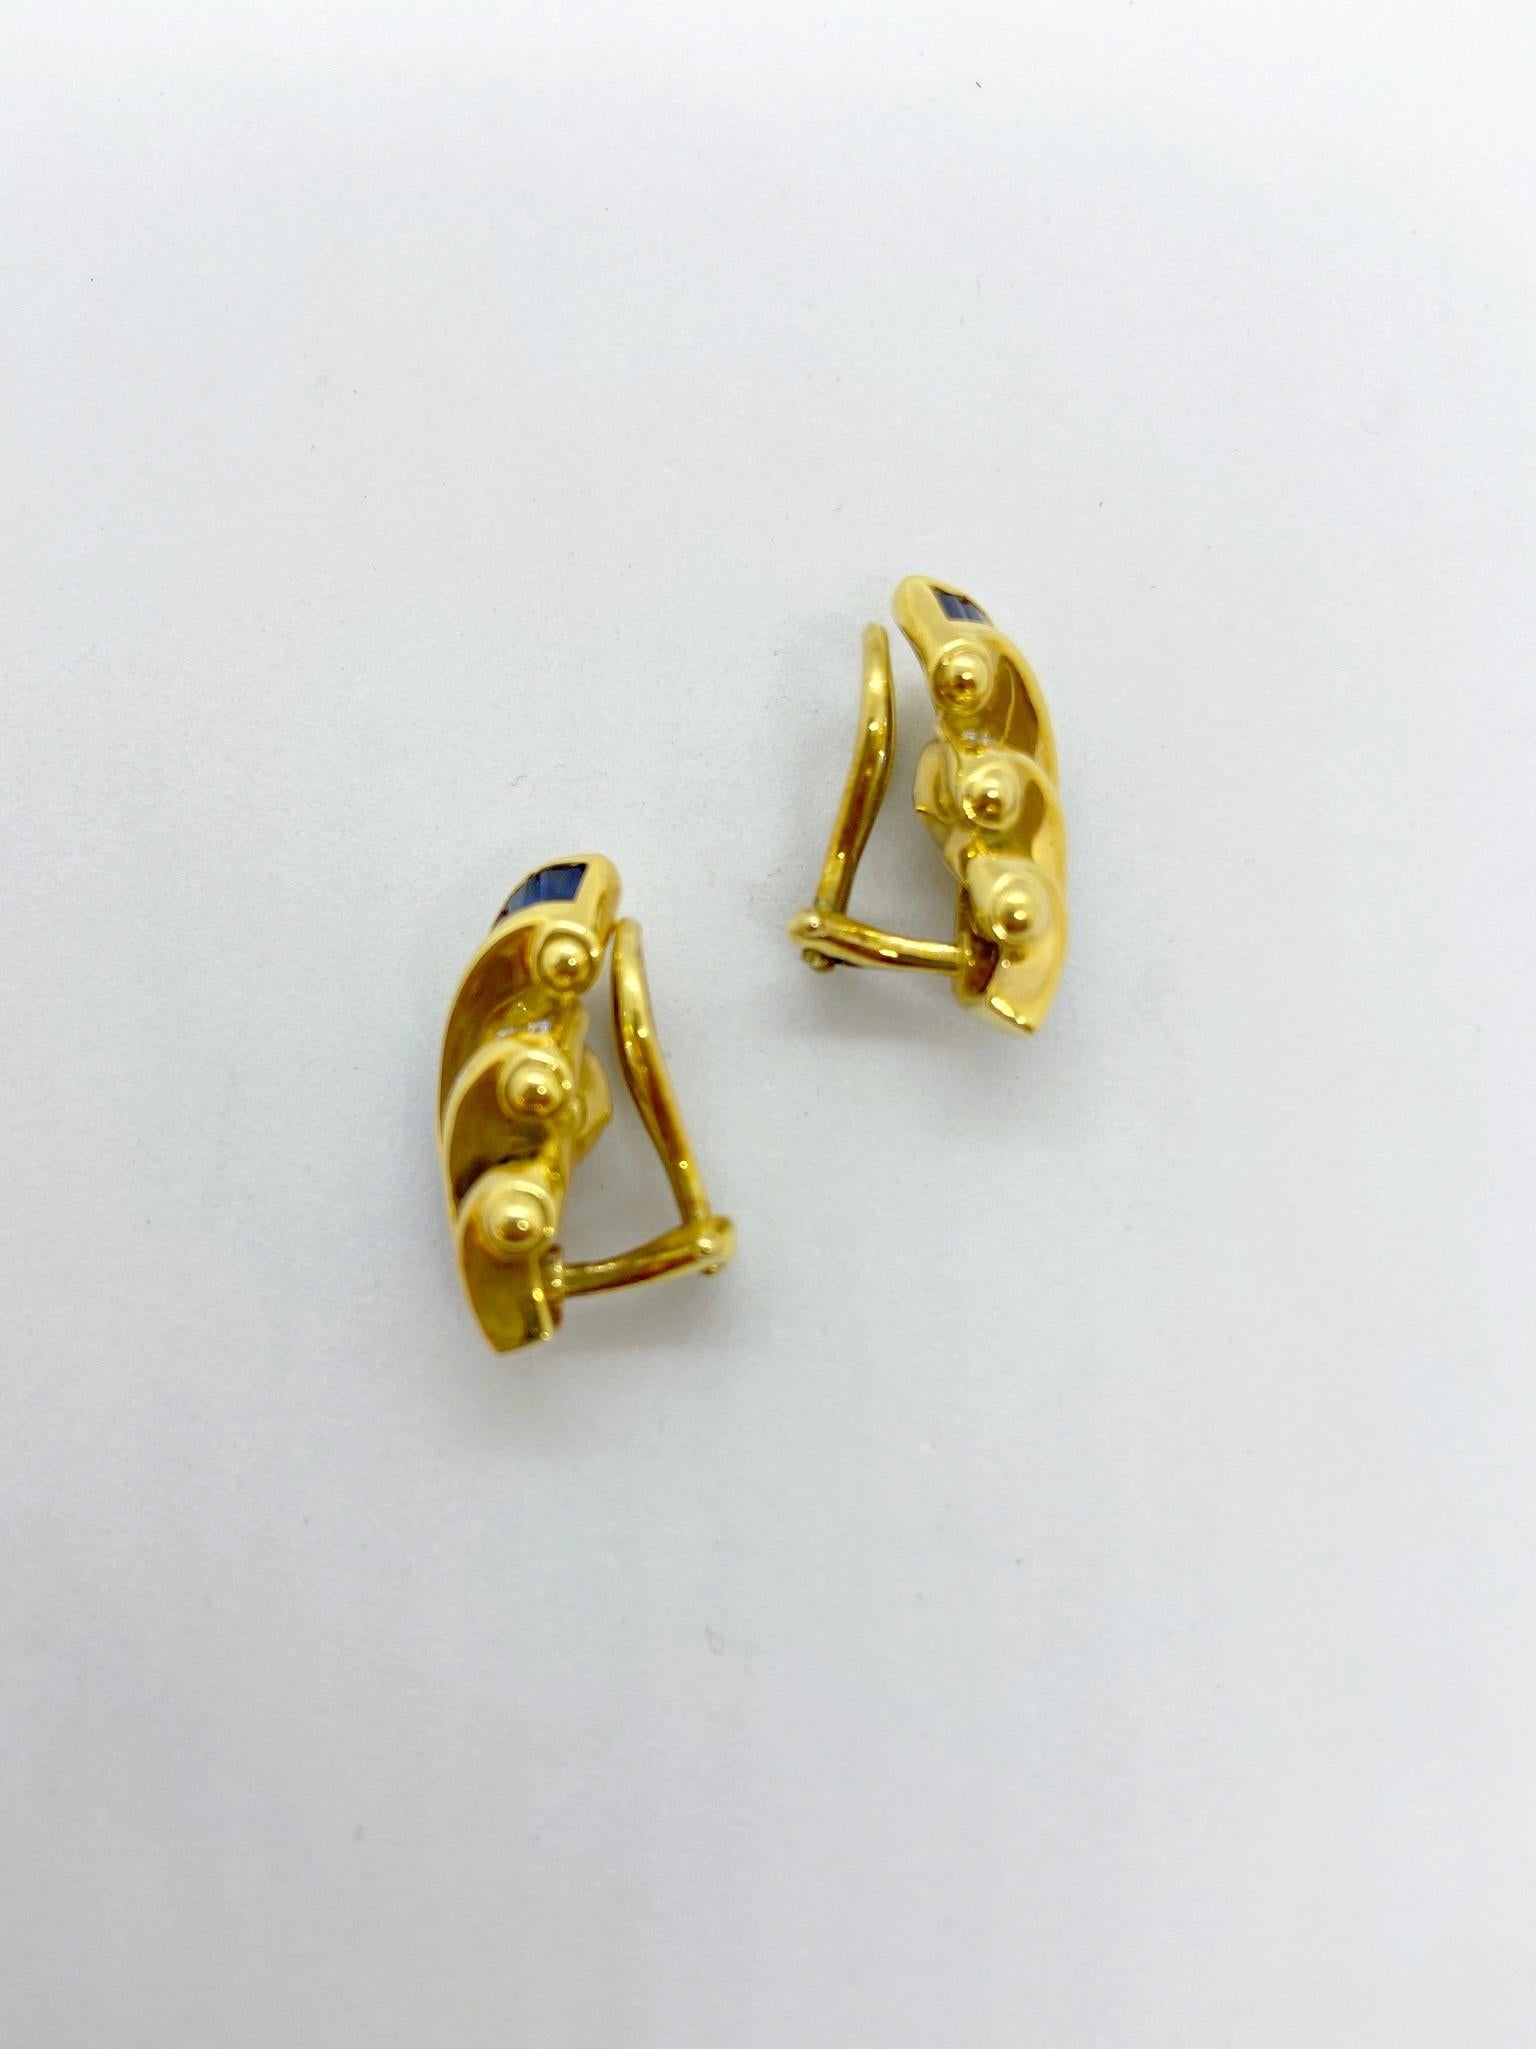 Baguette Cut Charles Krypell 18KT Gold Earrings 2.63 Carat Blue Sapphires and 0.74Ct. Diamond For Sale